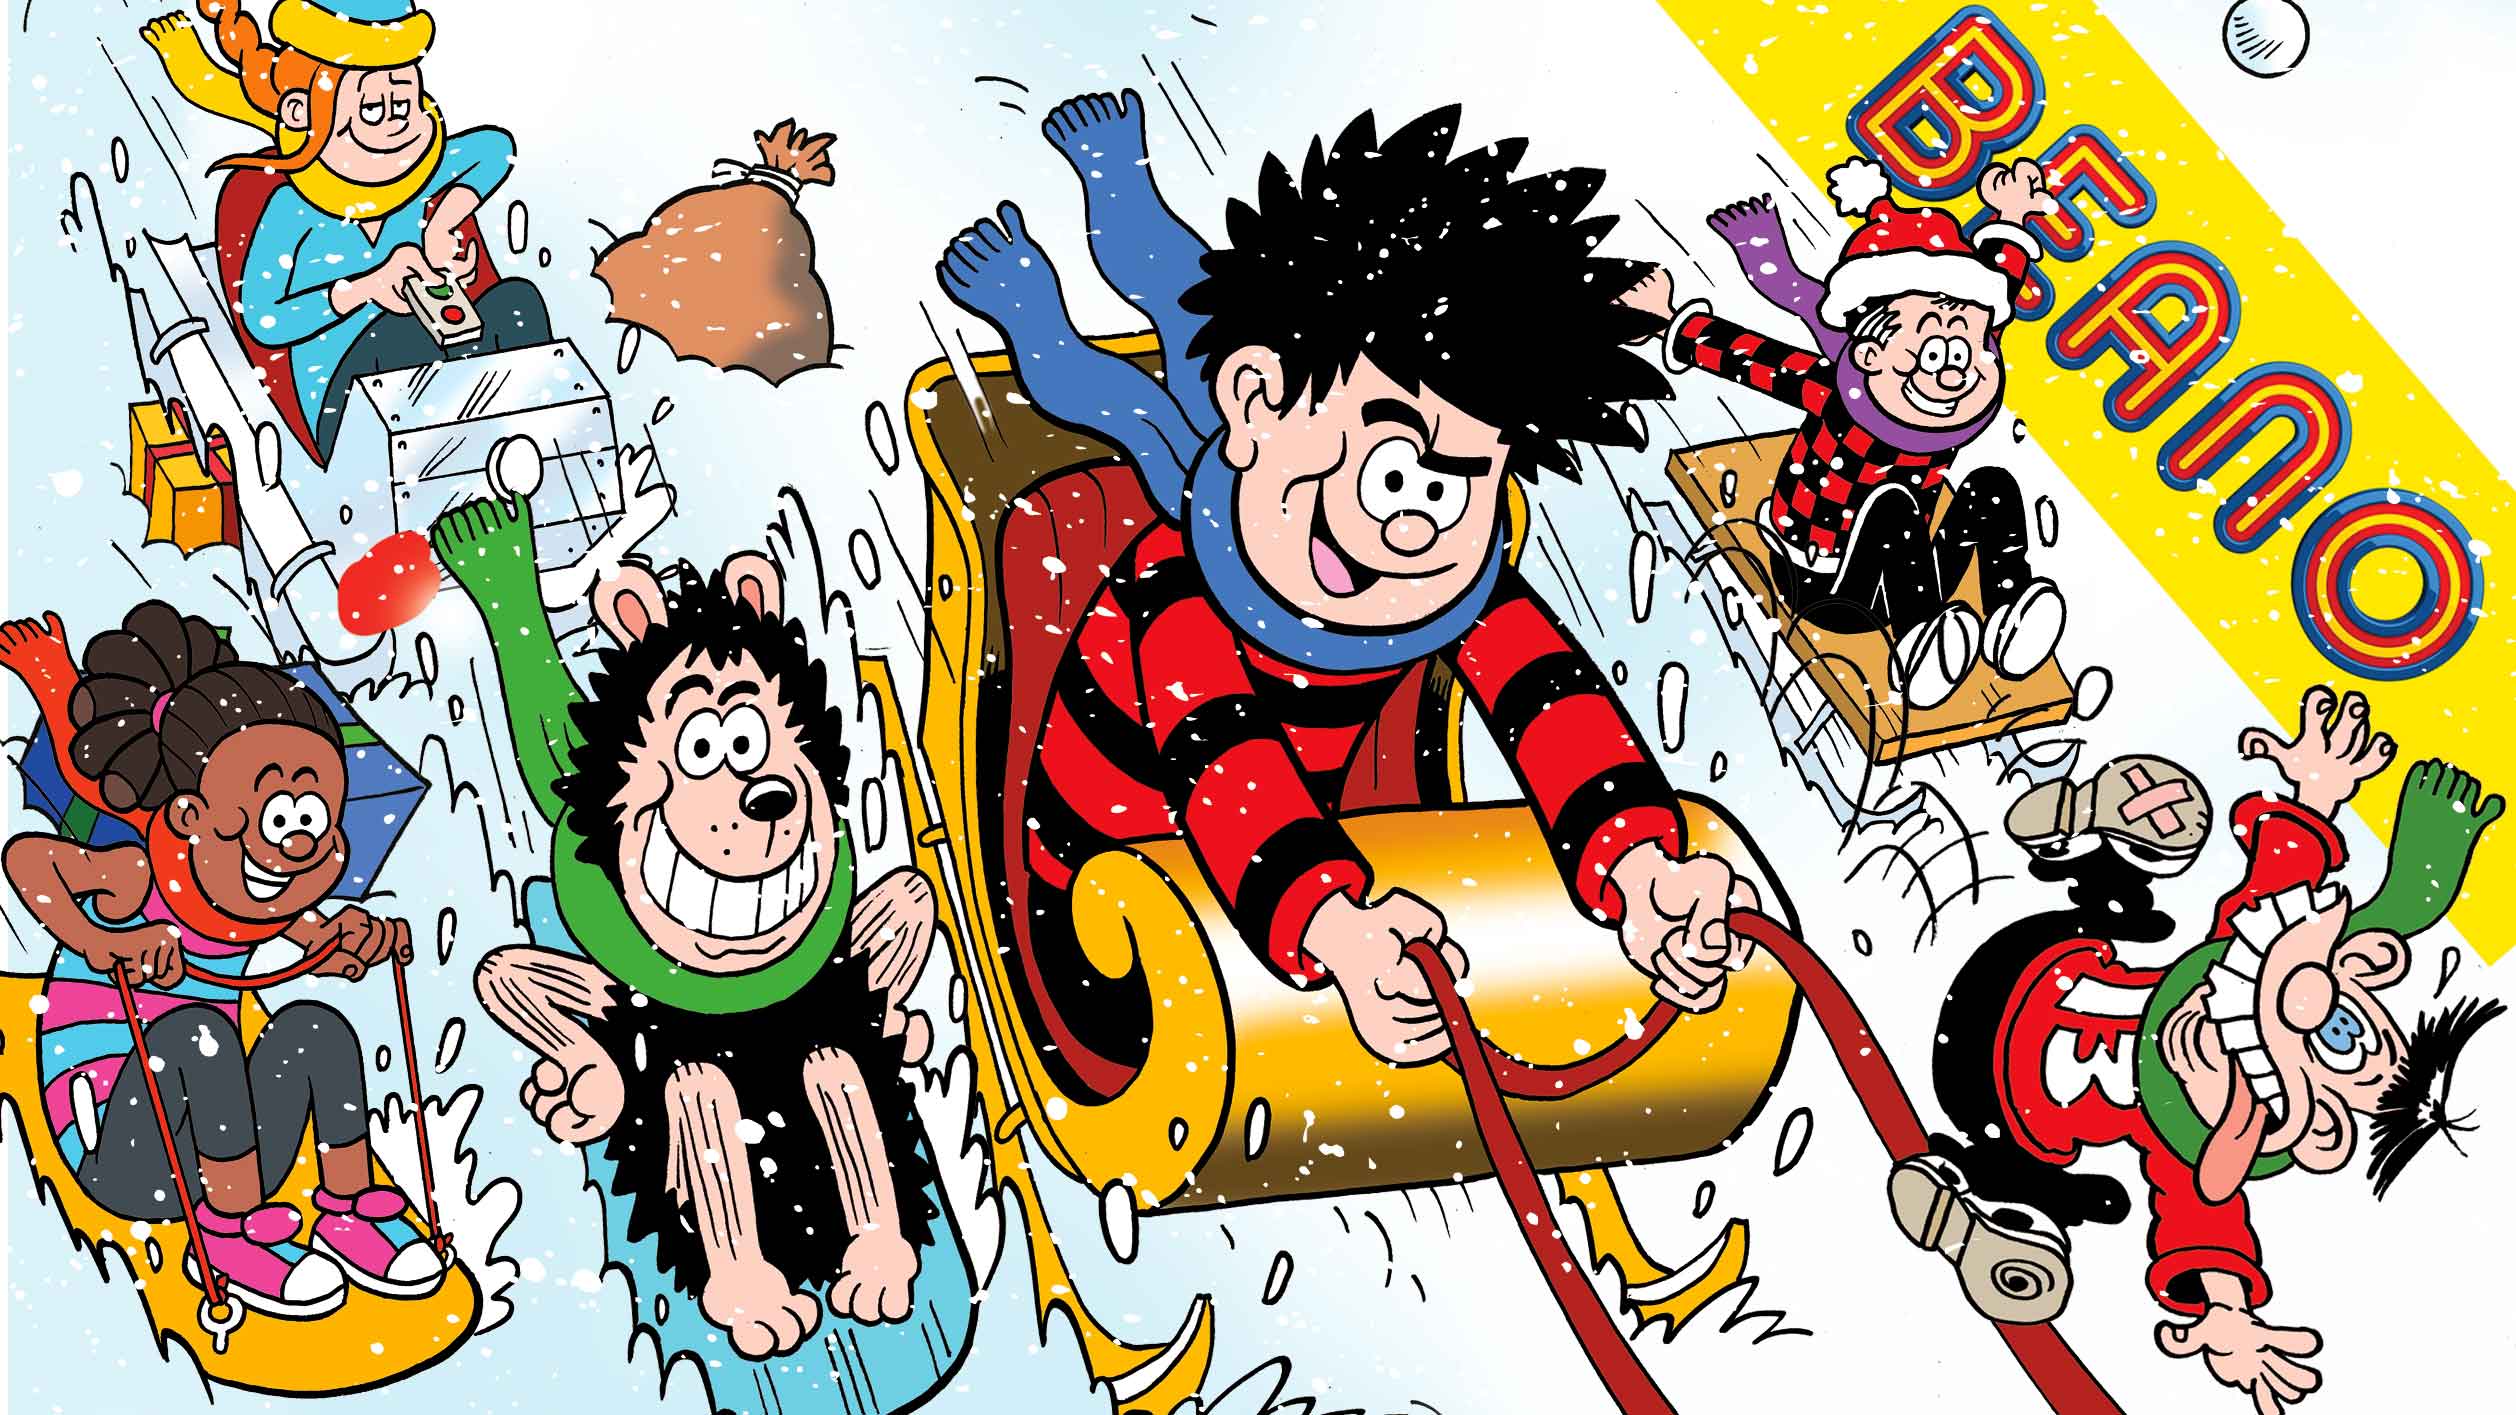 Inside Beano no. 4065 - The Snowball Fight Before Christmas!